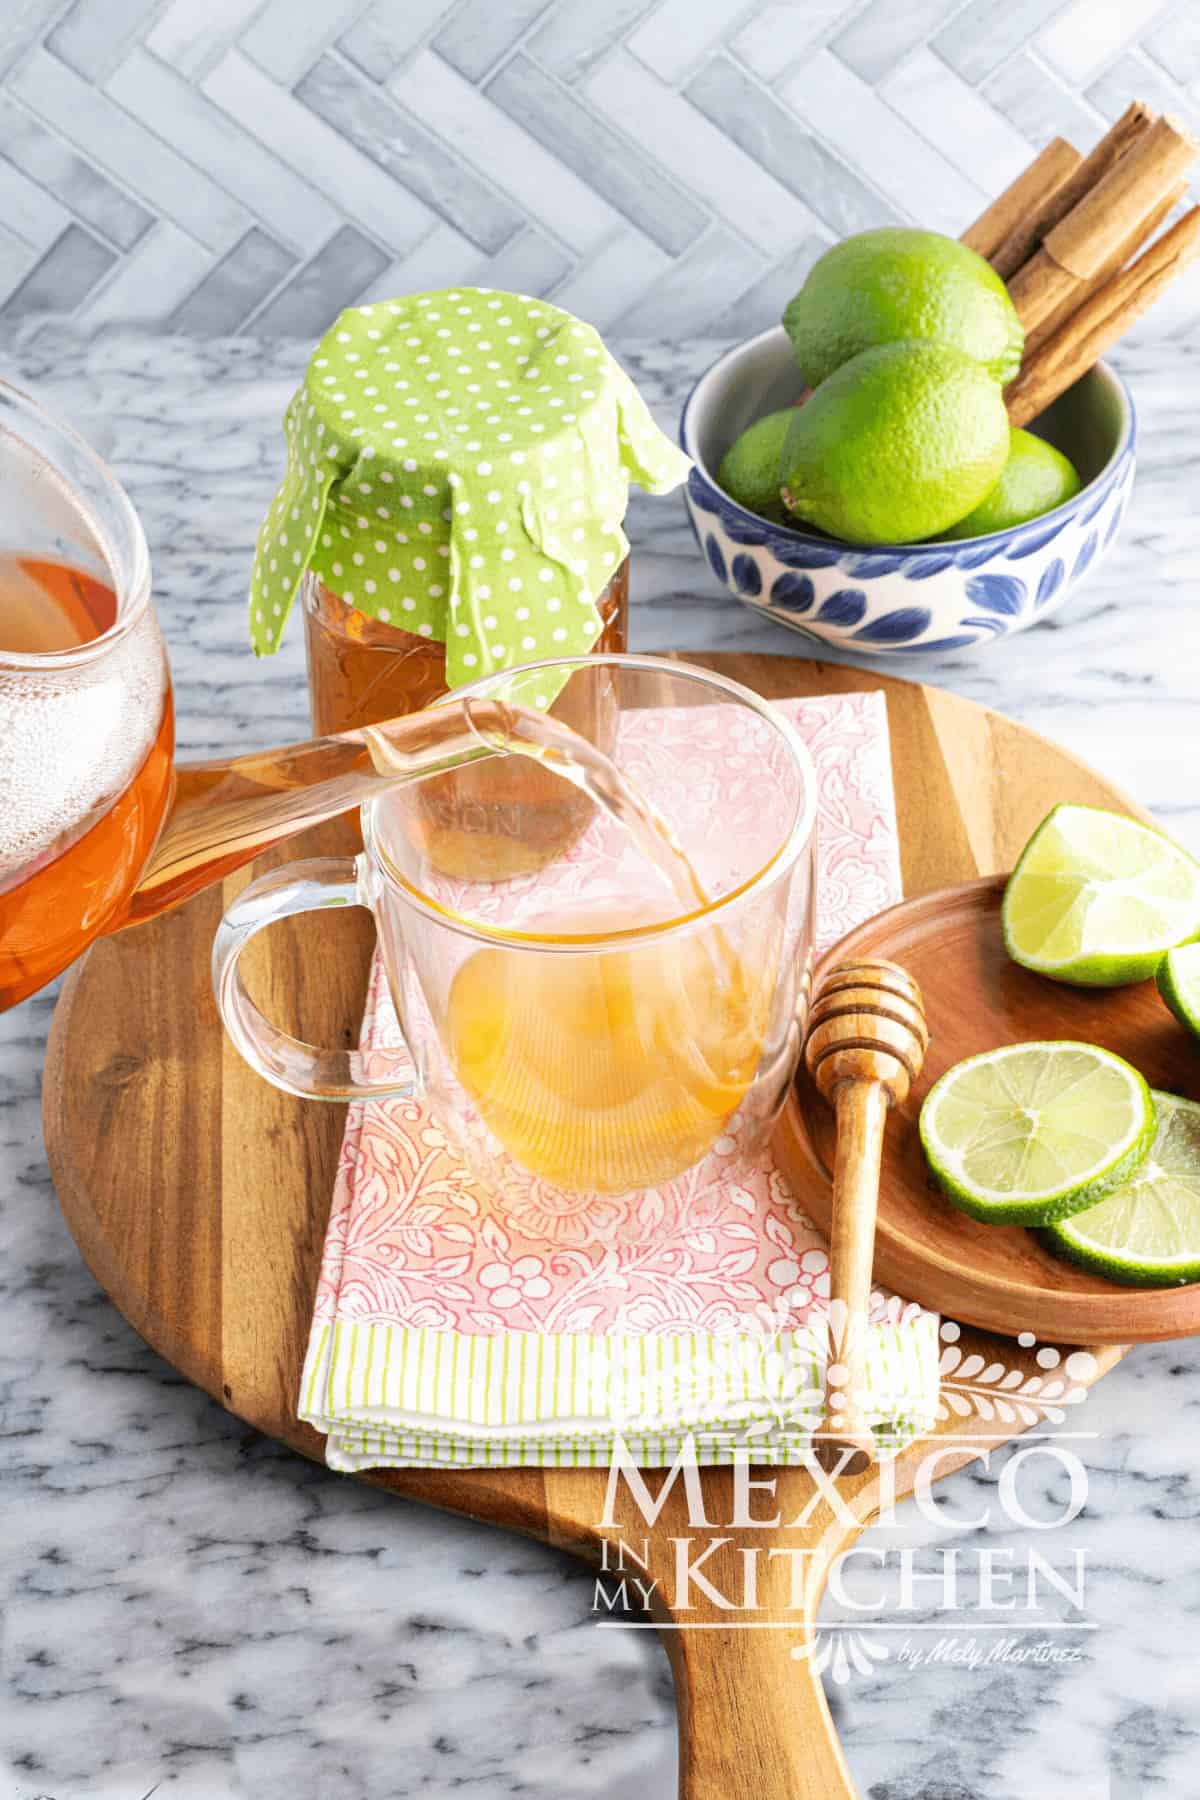 Hot tea served in a glass cup next to lime wedges